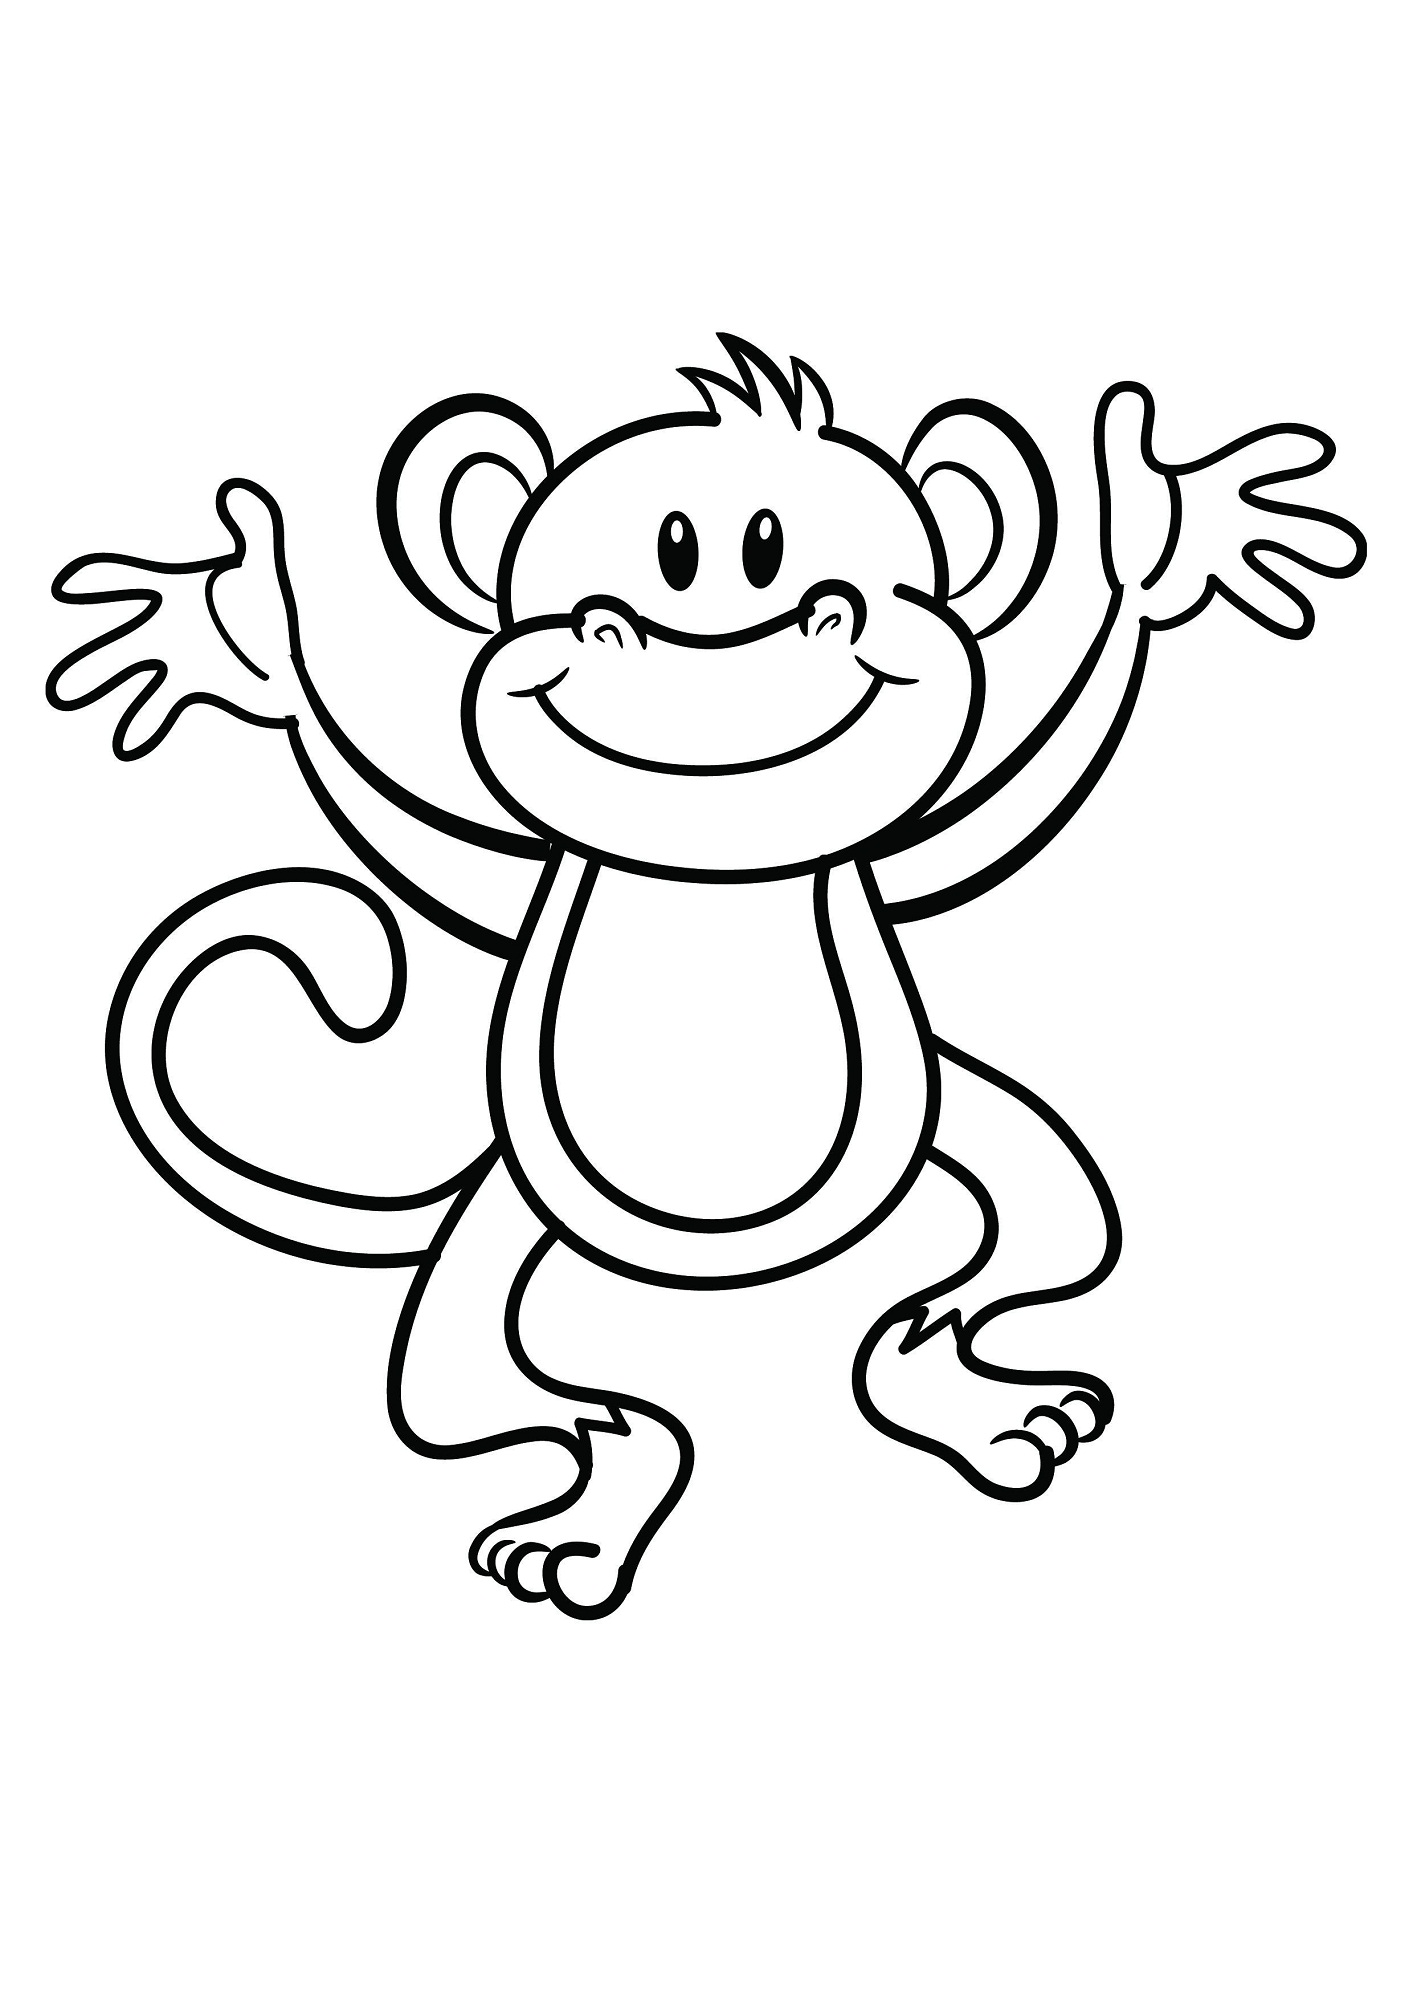 Coloring Pages of Monkeys Printable | Activity Shelter